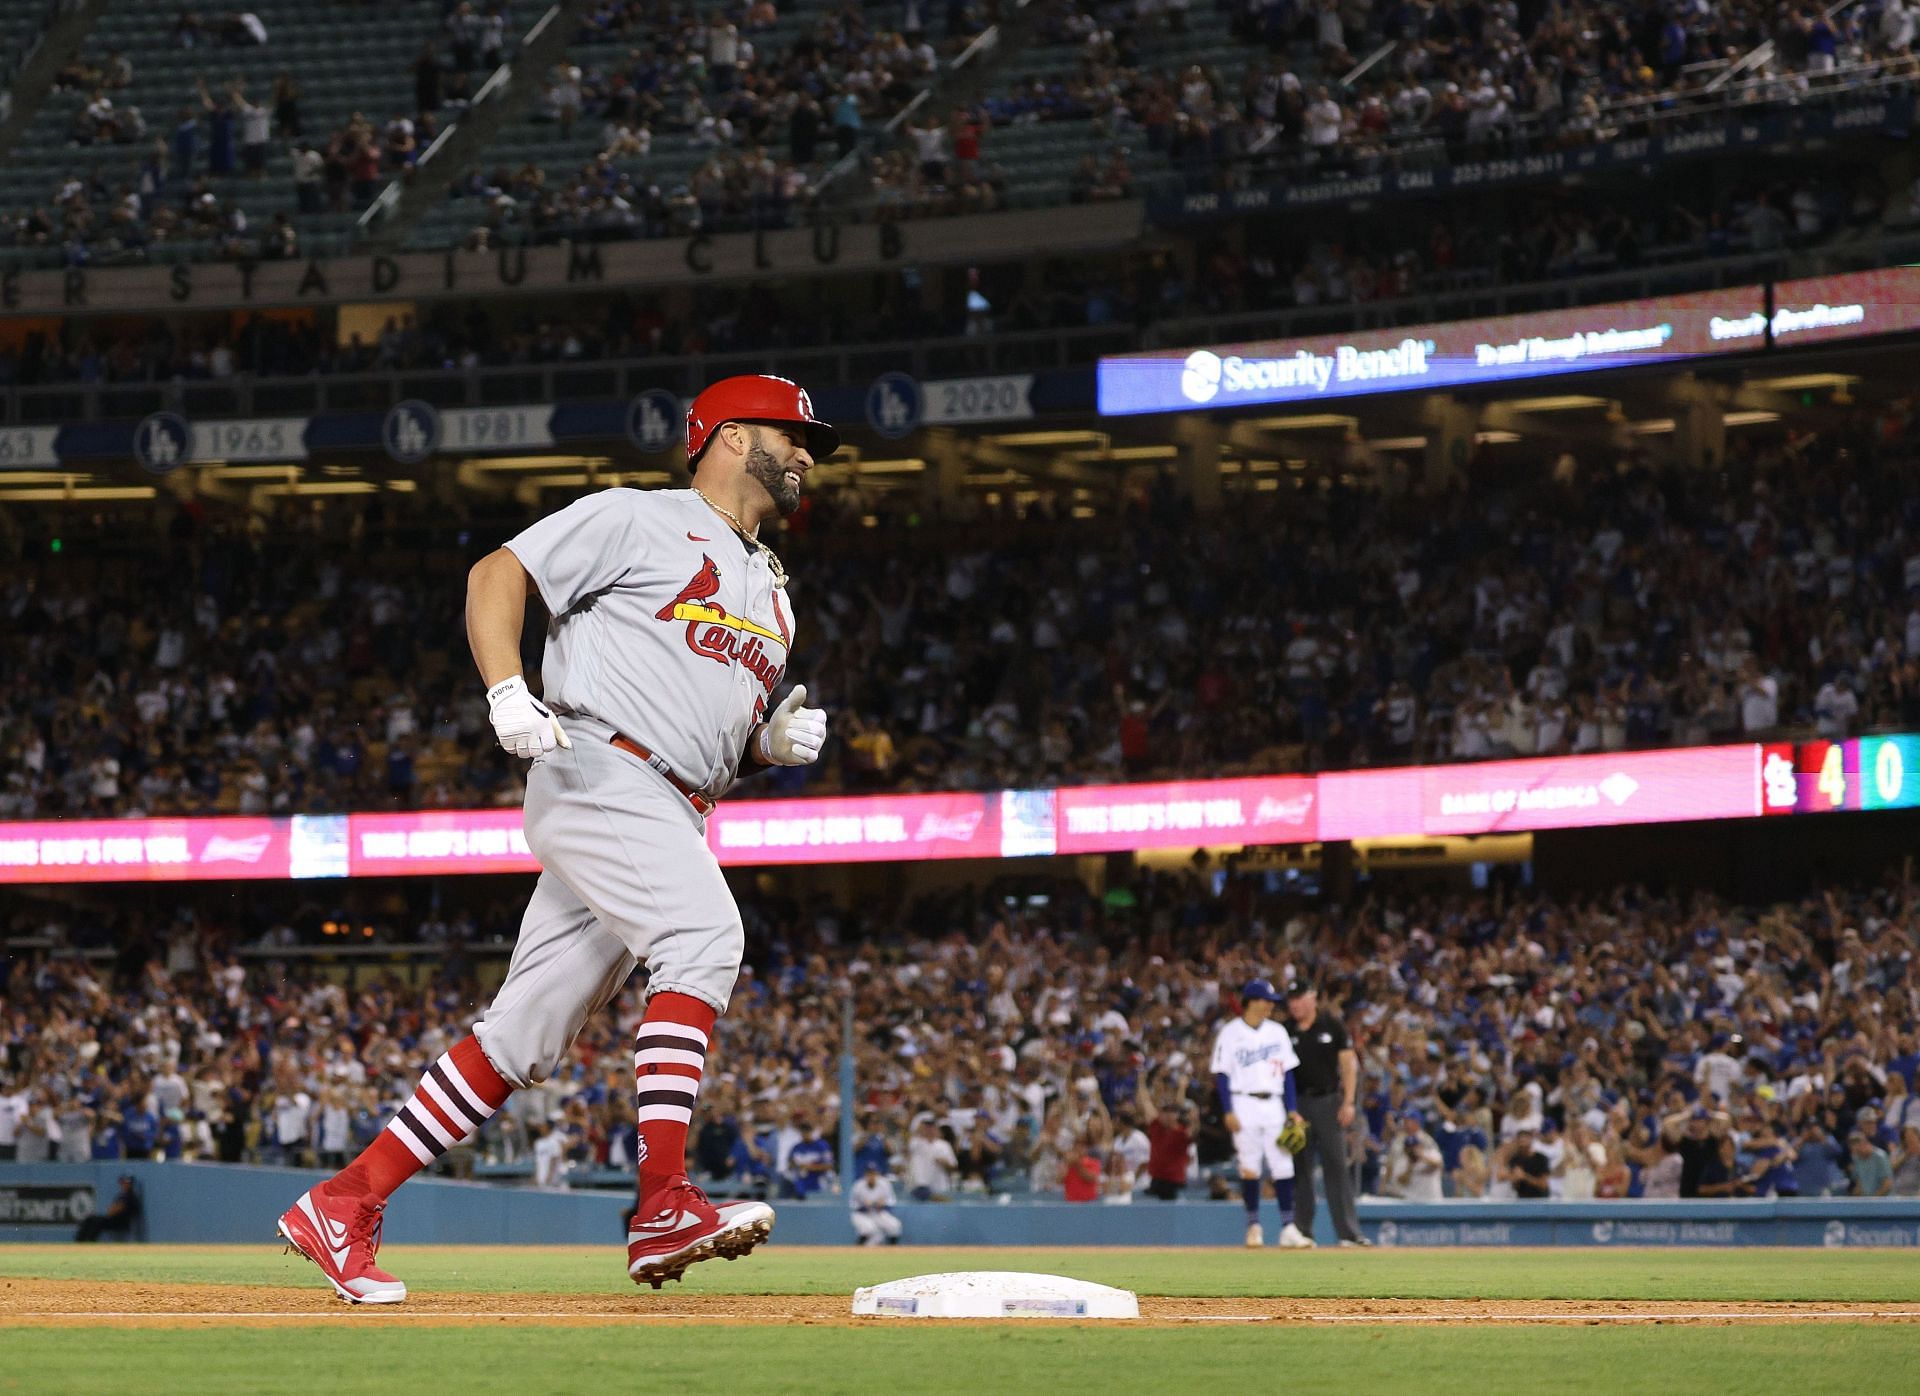 St. Louis Cardinals v Los Angeles Dodgers - Pujols rounds the bases after launching the 700th dinger of his career